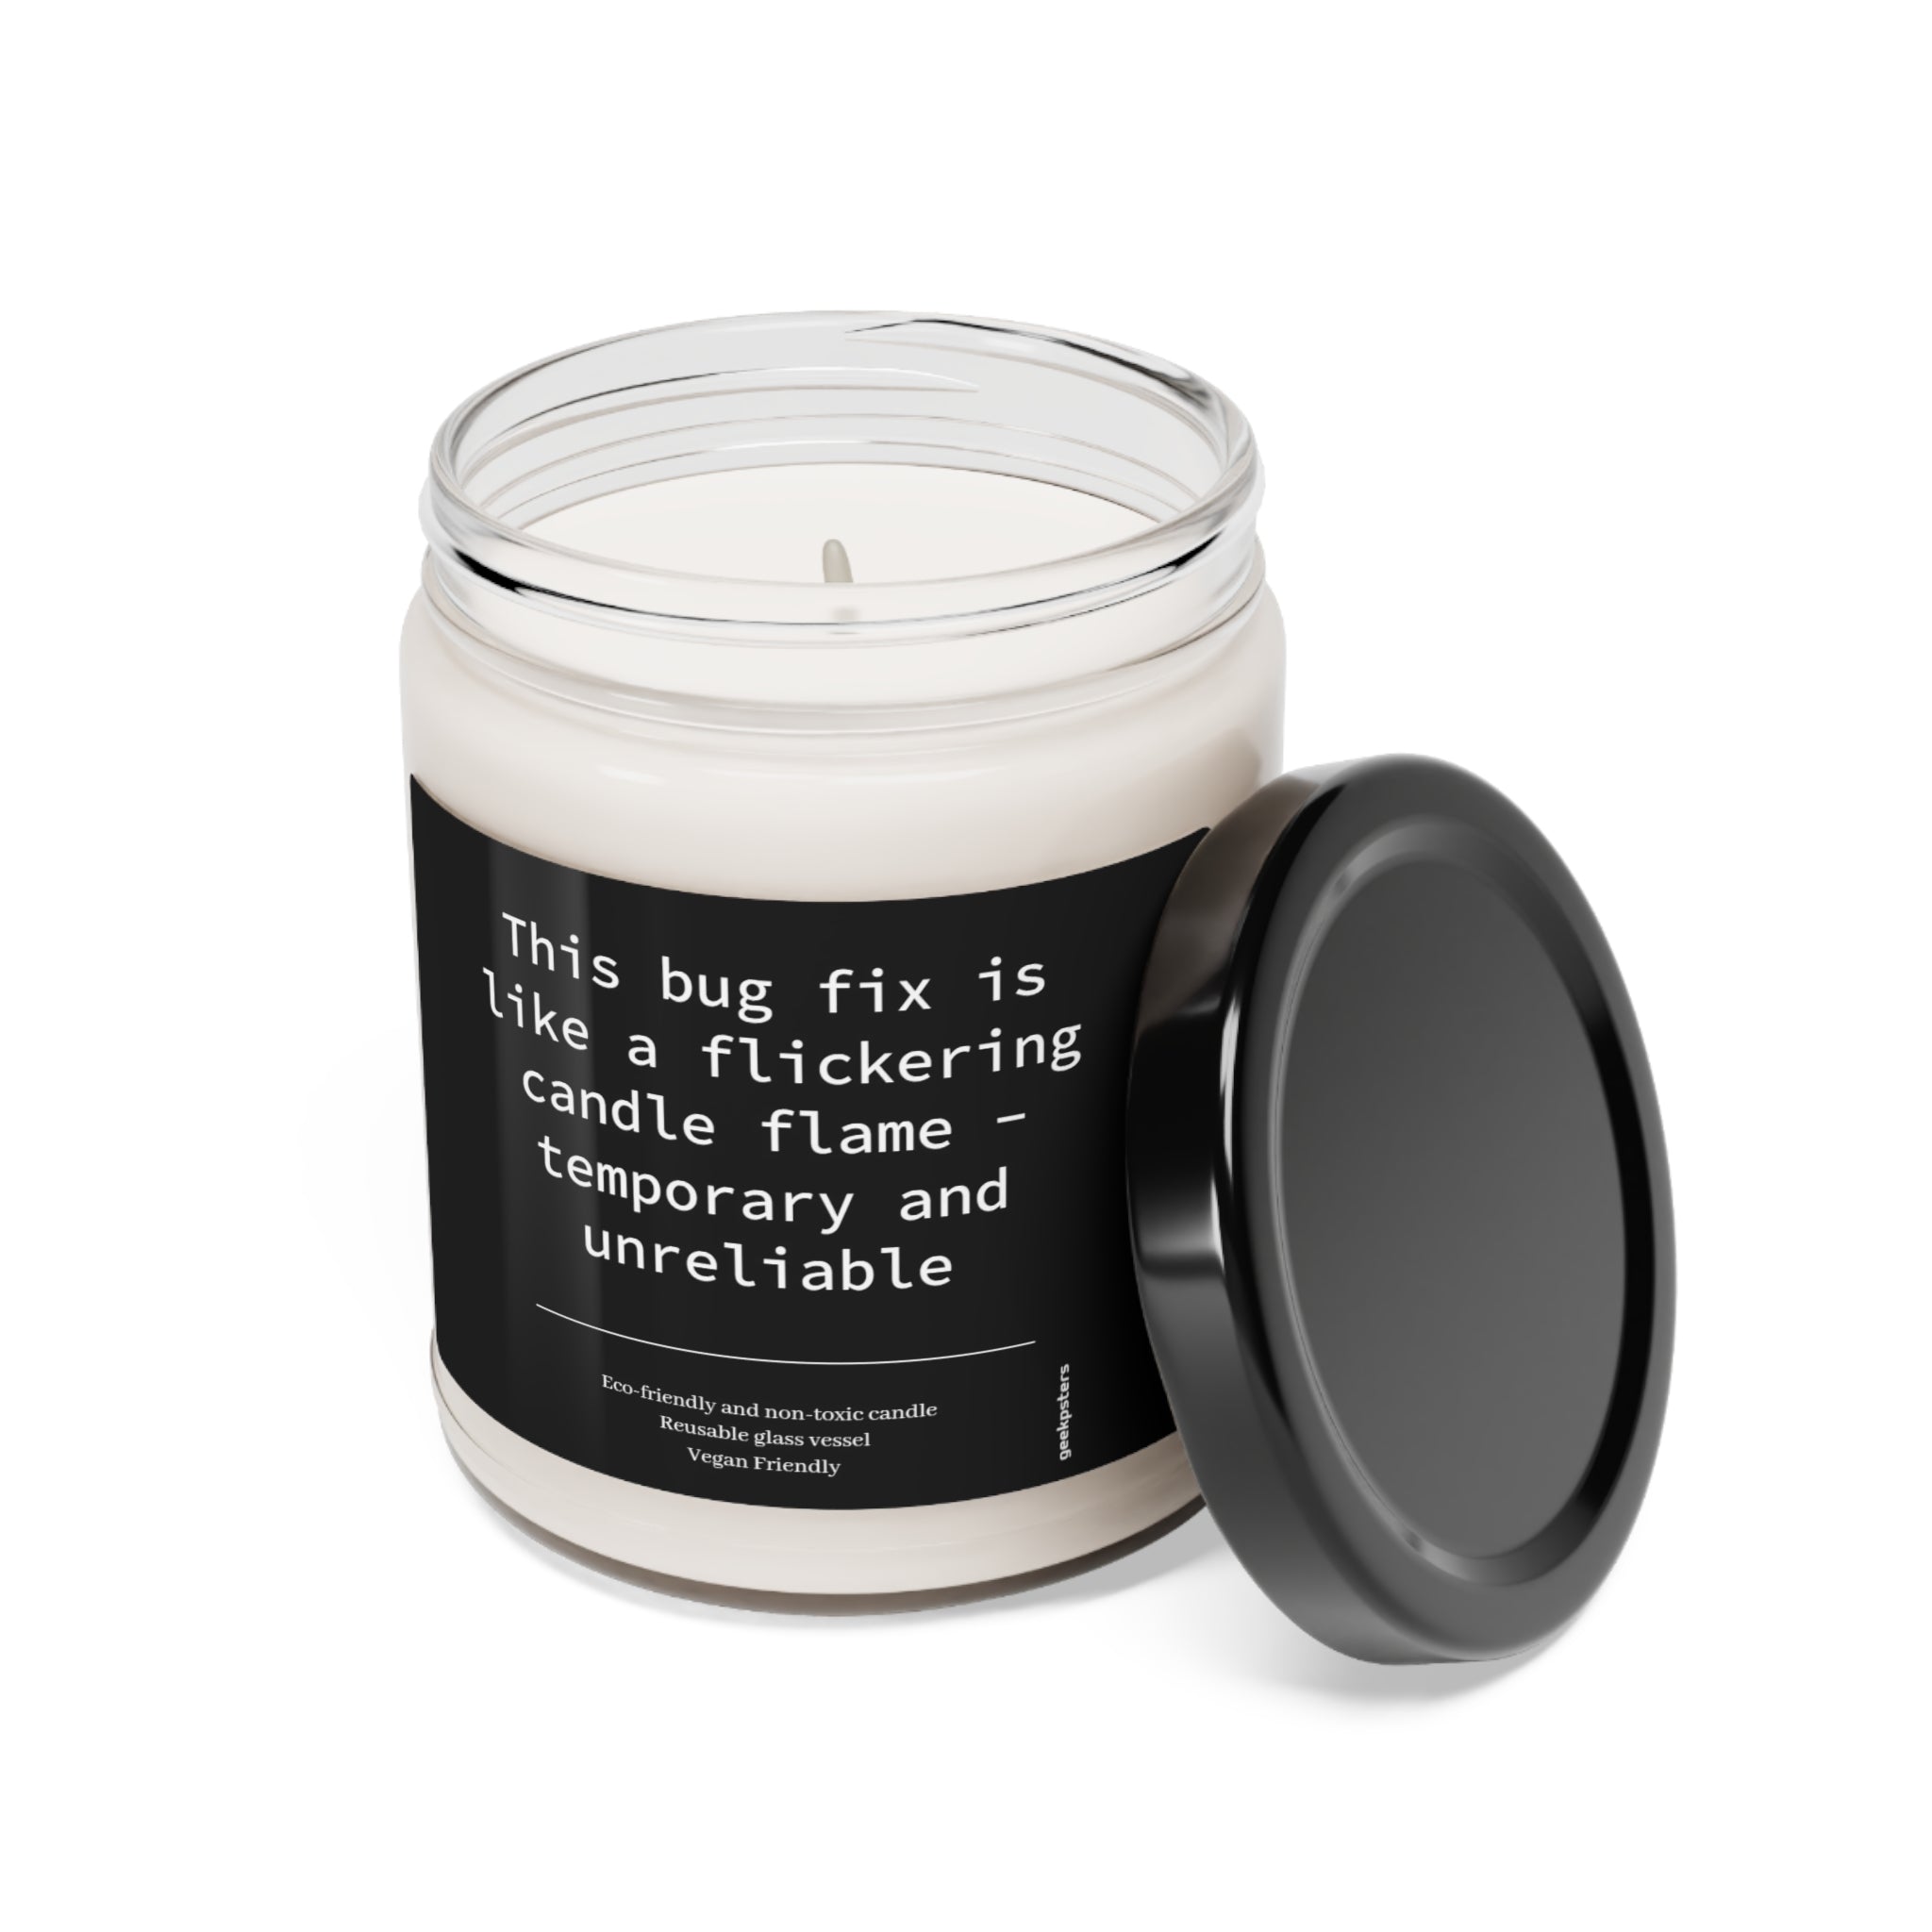 This Bug Fix is Like a Flame - Scented Soy Candle, 9oz with a humorous label comparing a bug fix to a flickering candle flame, indicating it is temporary and unreliable, features a natural soy wax blend.